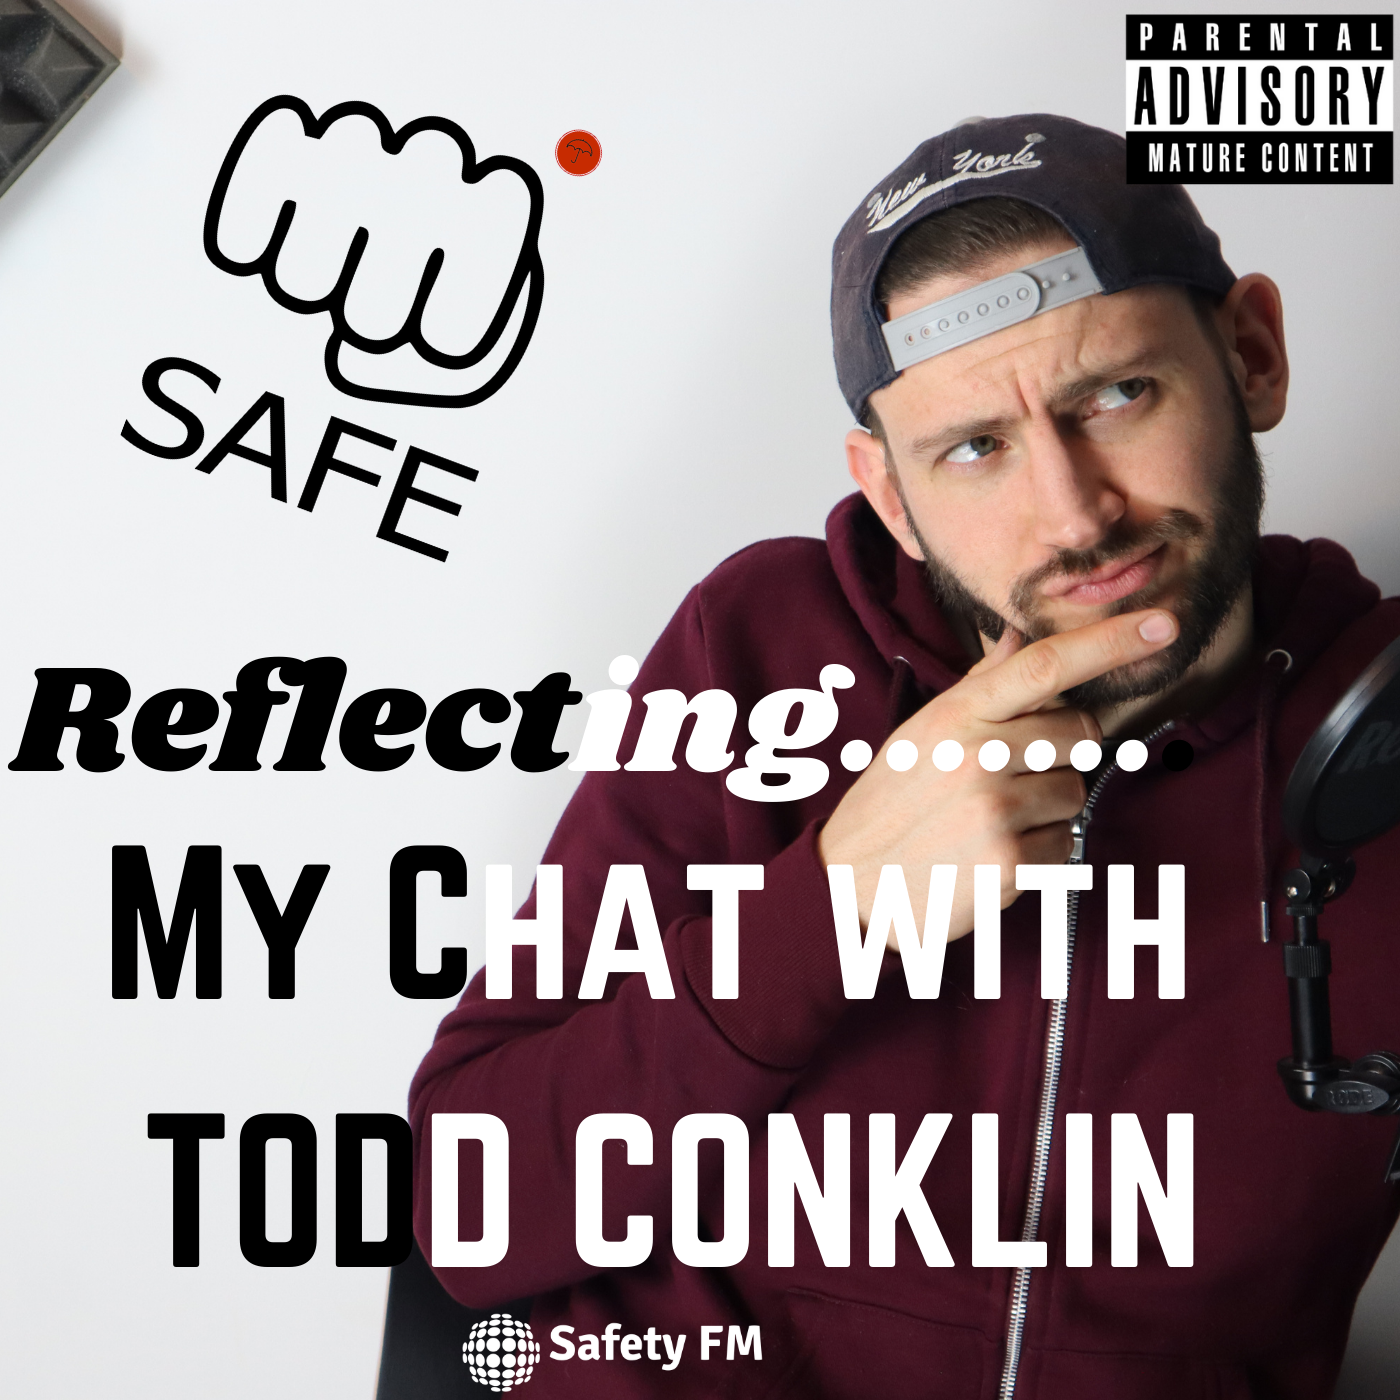 Reflecting on my chat with Todd Conklin